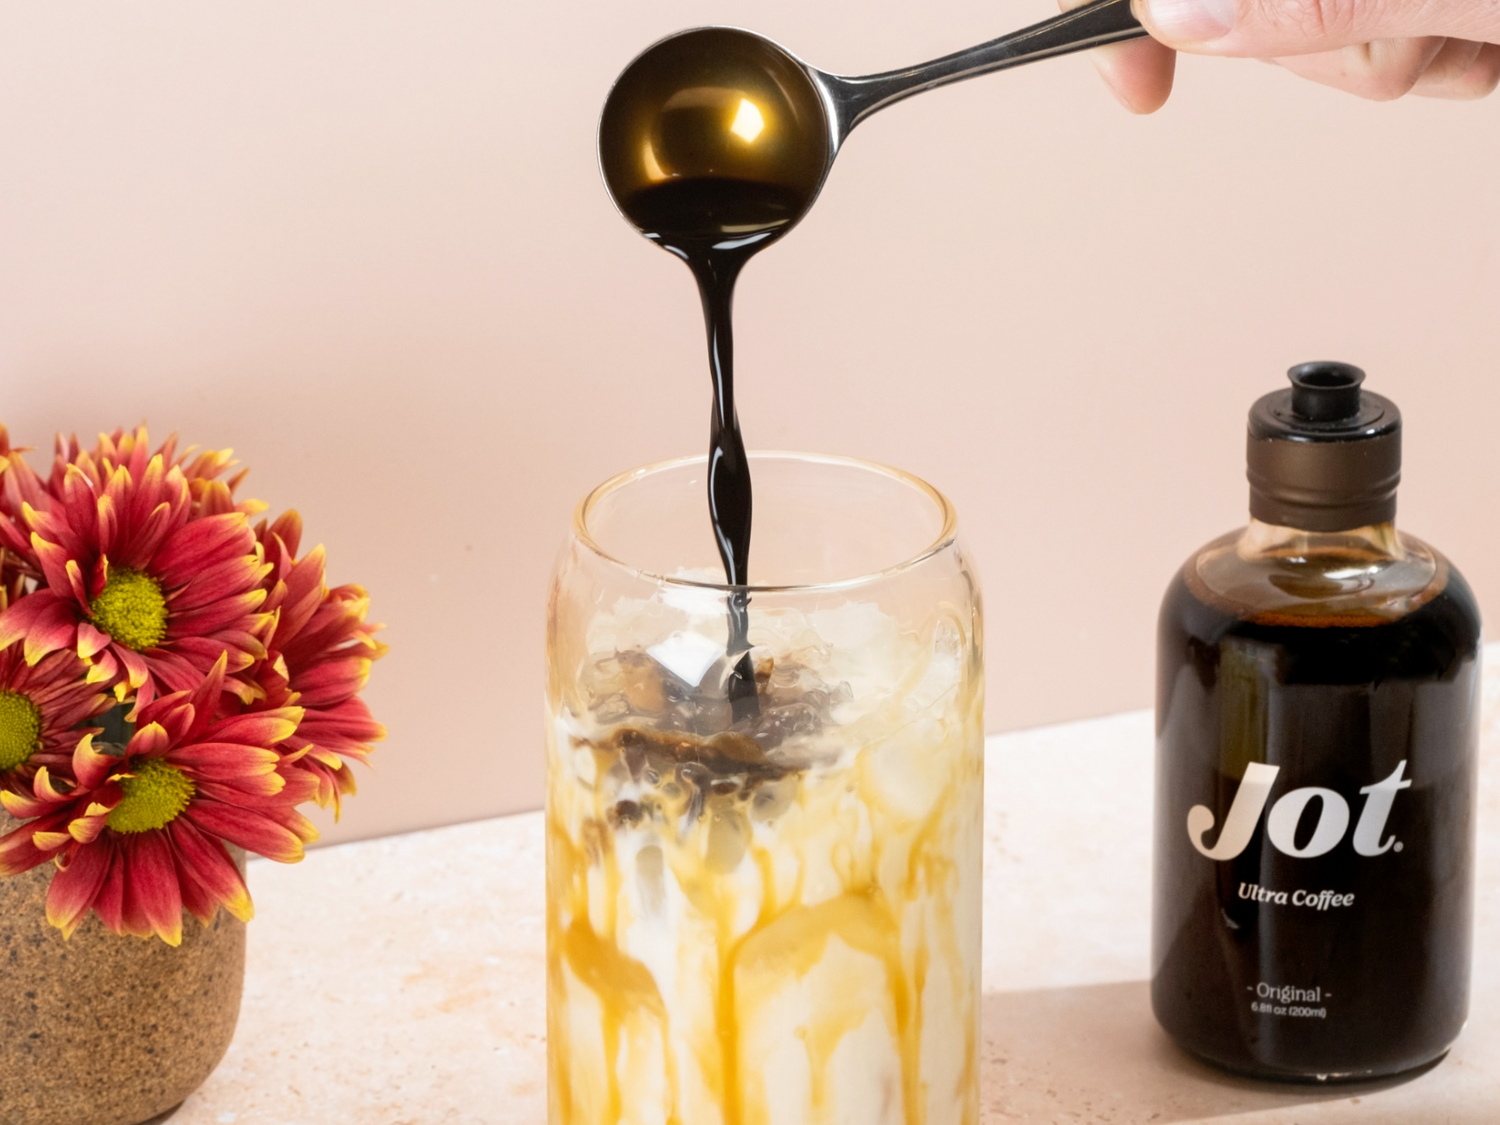 How to make an Iced Caramel Macchiato at home with coffee concentrate